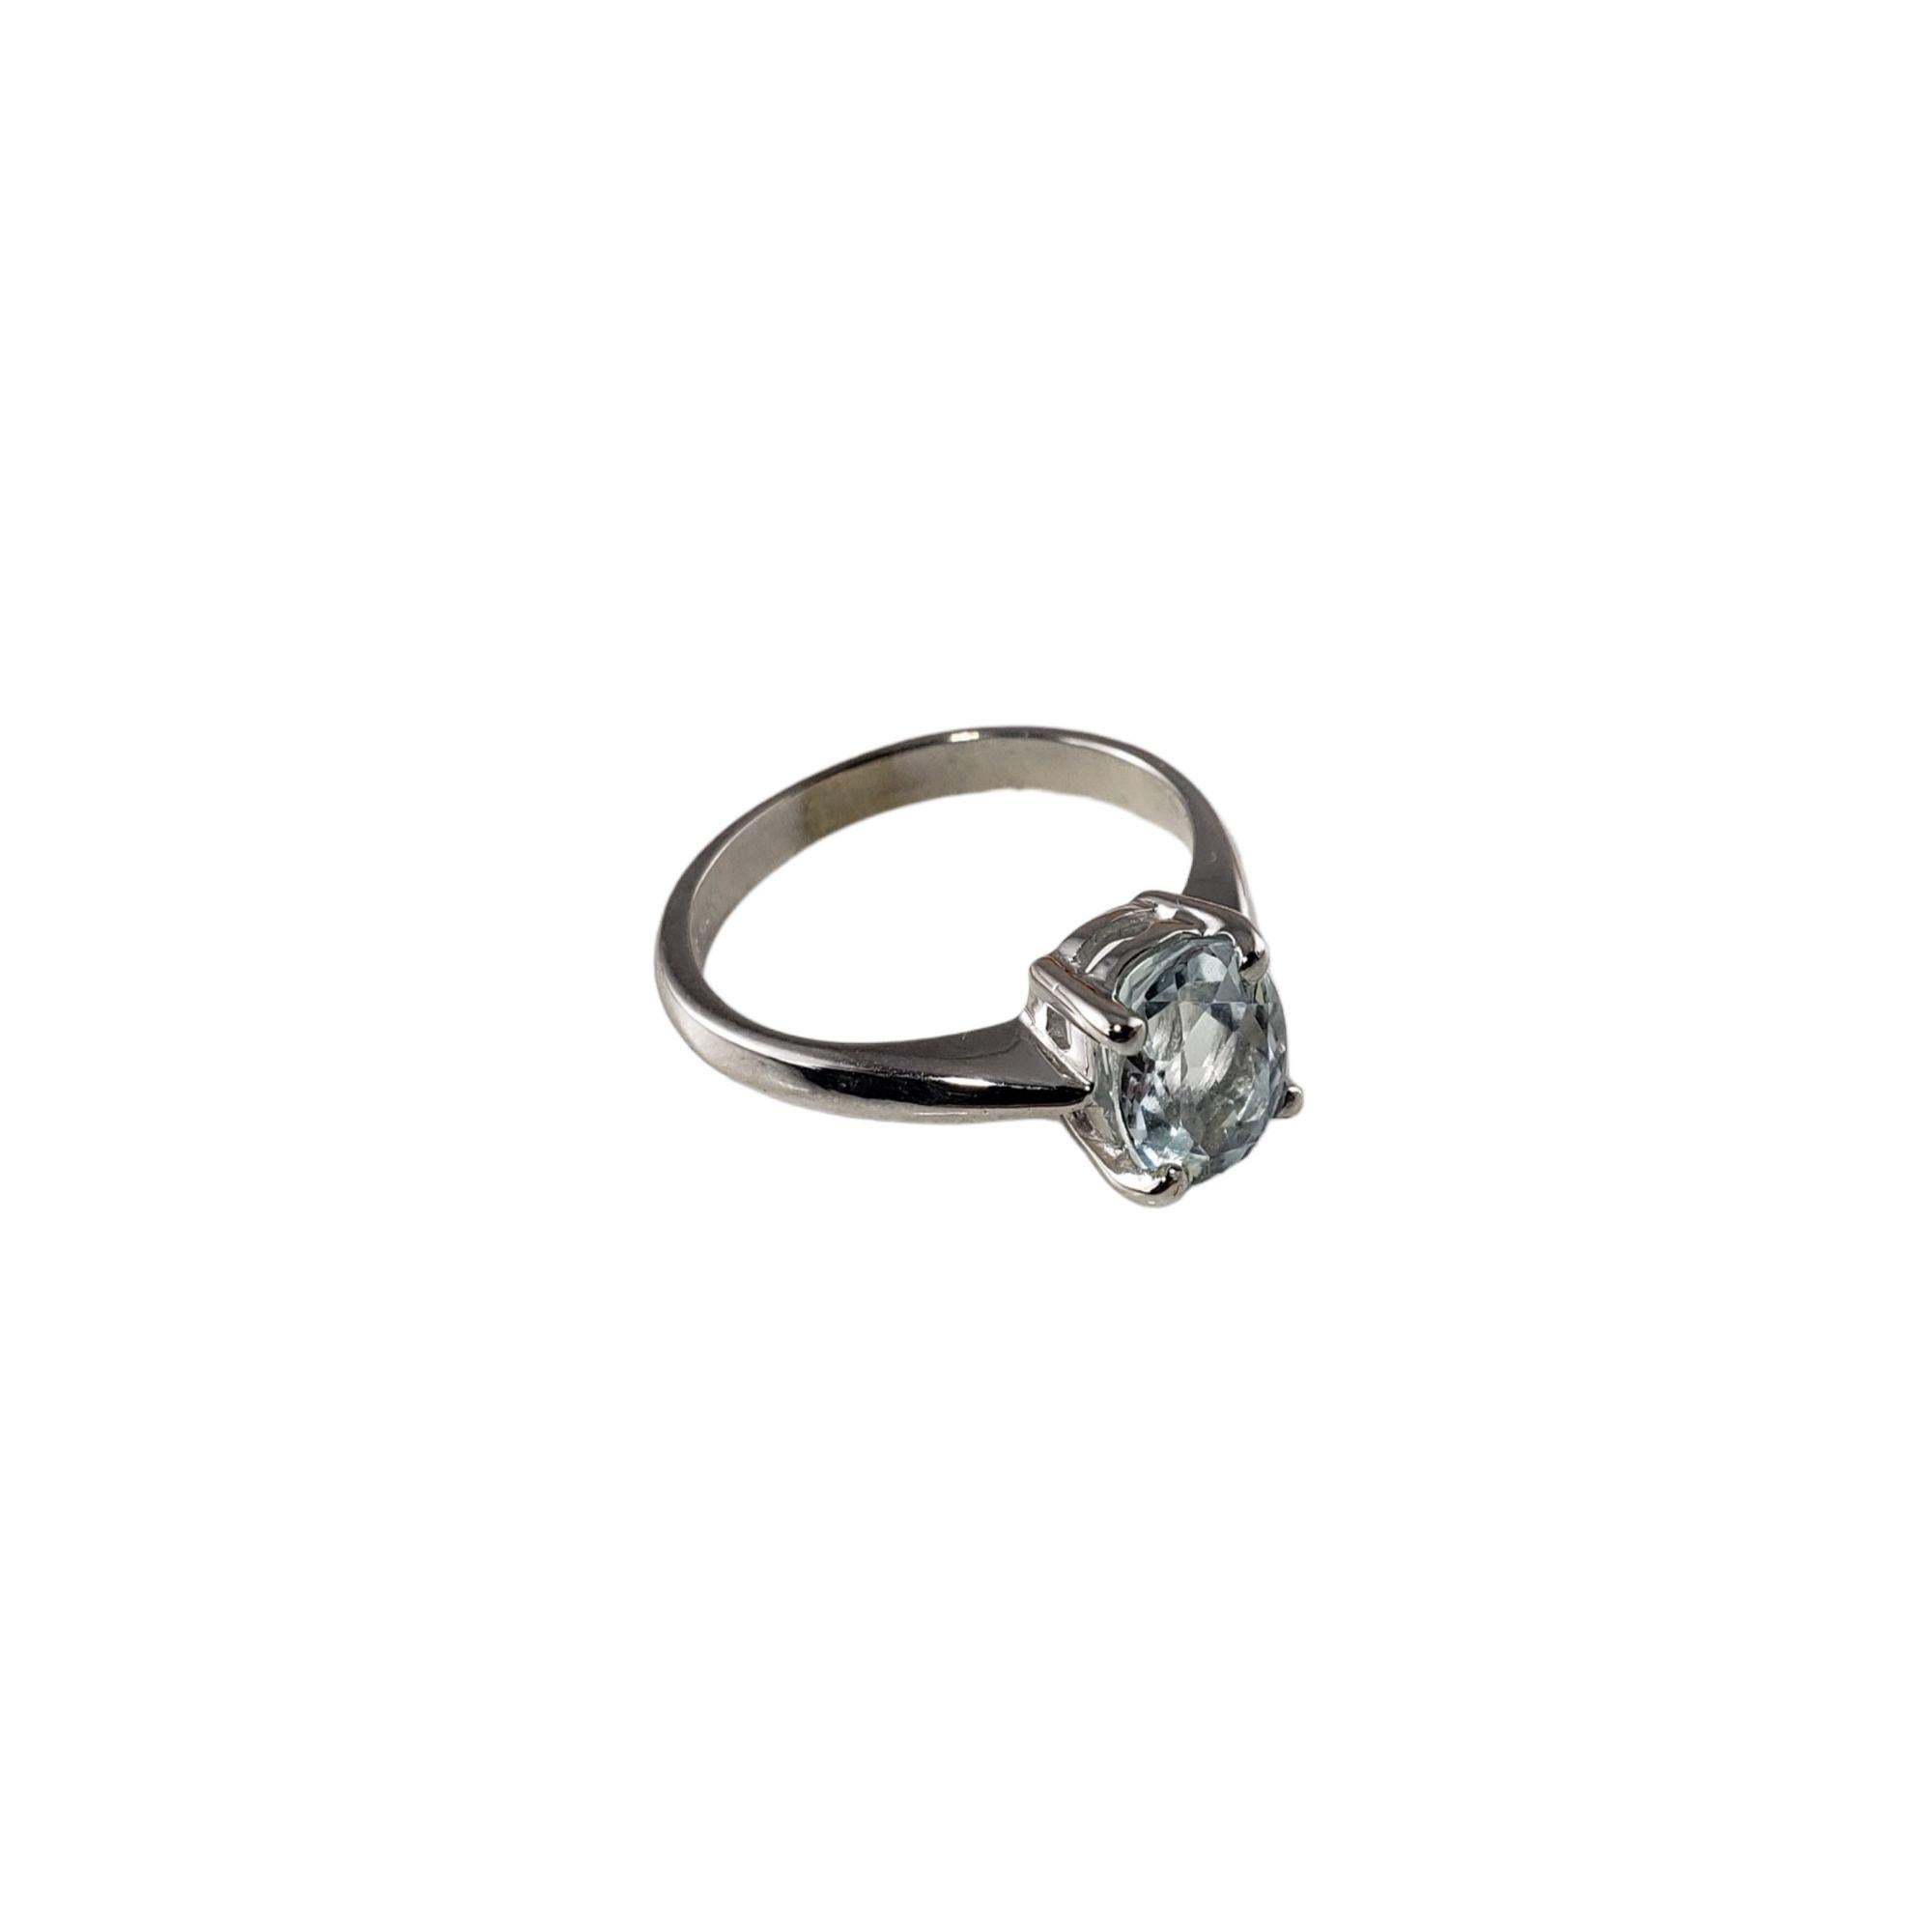 Vintage 14 Karat White Gold Aquamarine Ring Size 5.5-

This lovely ring features one oval aquamarine (8 mm x 6 mm) set in classic 14K white gold. Shank: 2 mm.

Aquamarine weight: 1.15 ct.

Ring Size: 5.5

Weight: 1.7 dwt. / 2.7 gr.

Stamped: